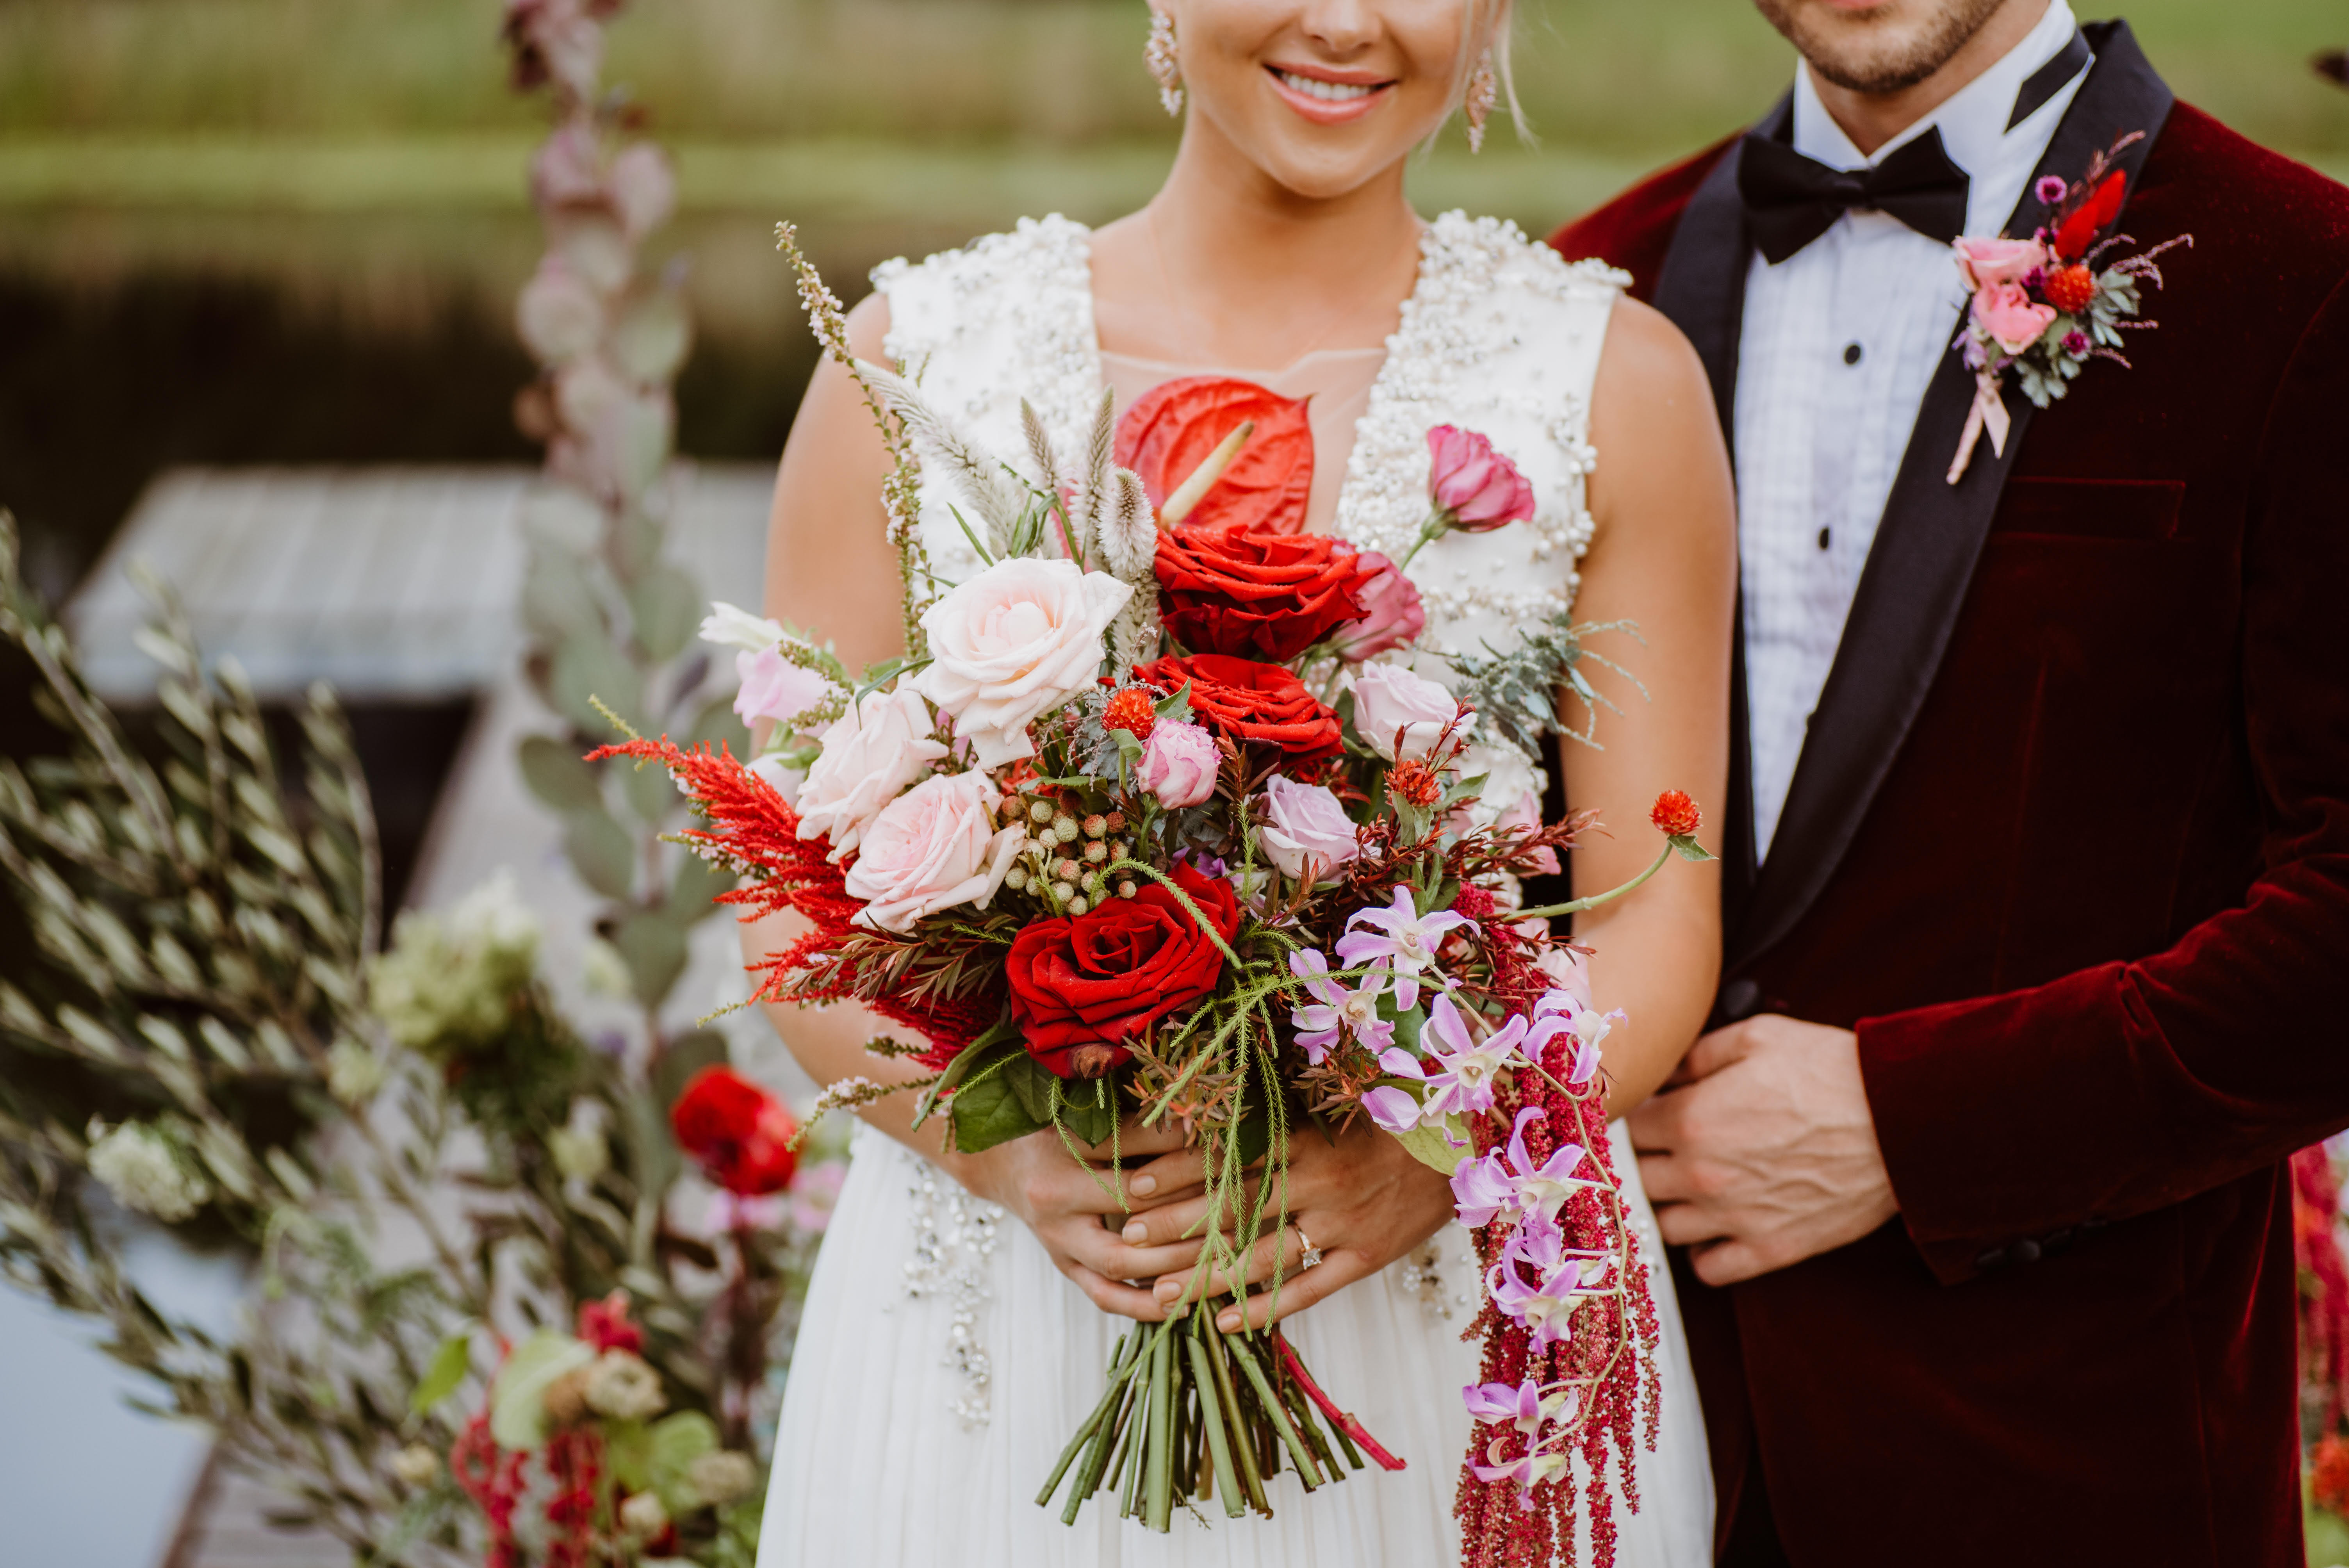 Wedding flowers and bouqets for creative brides